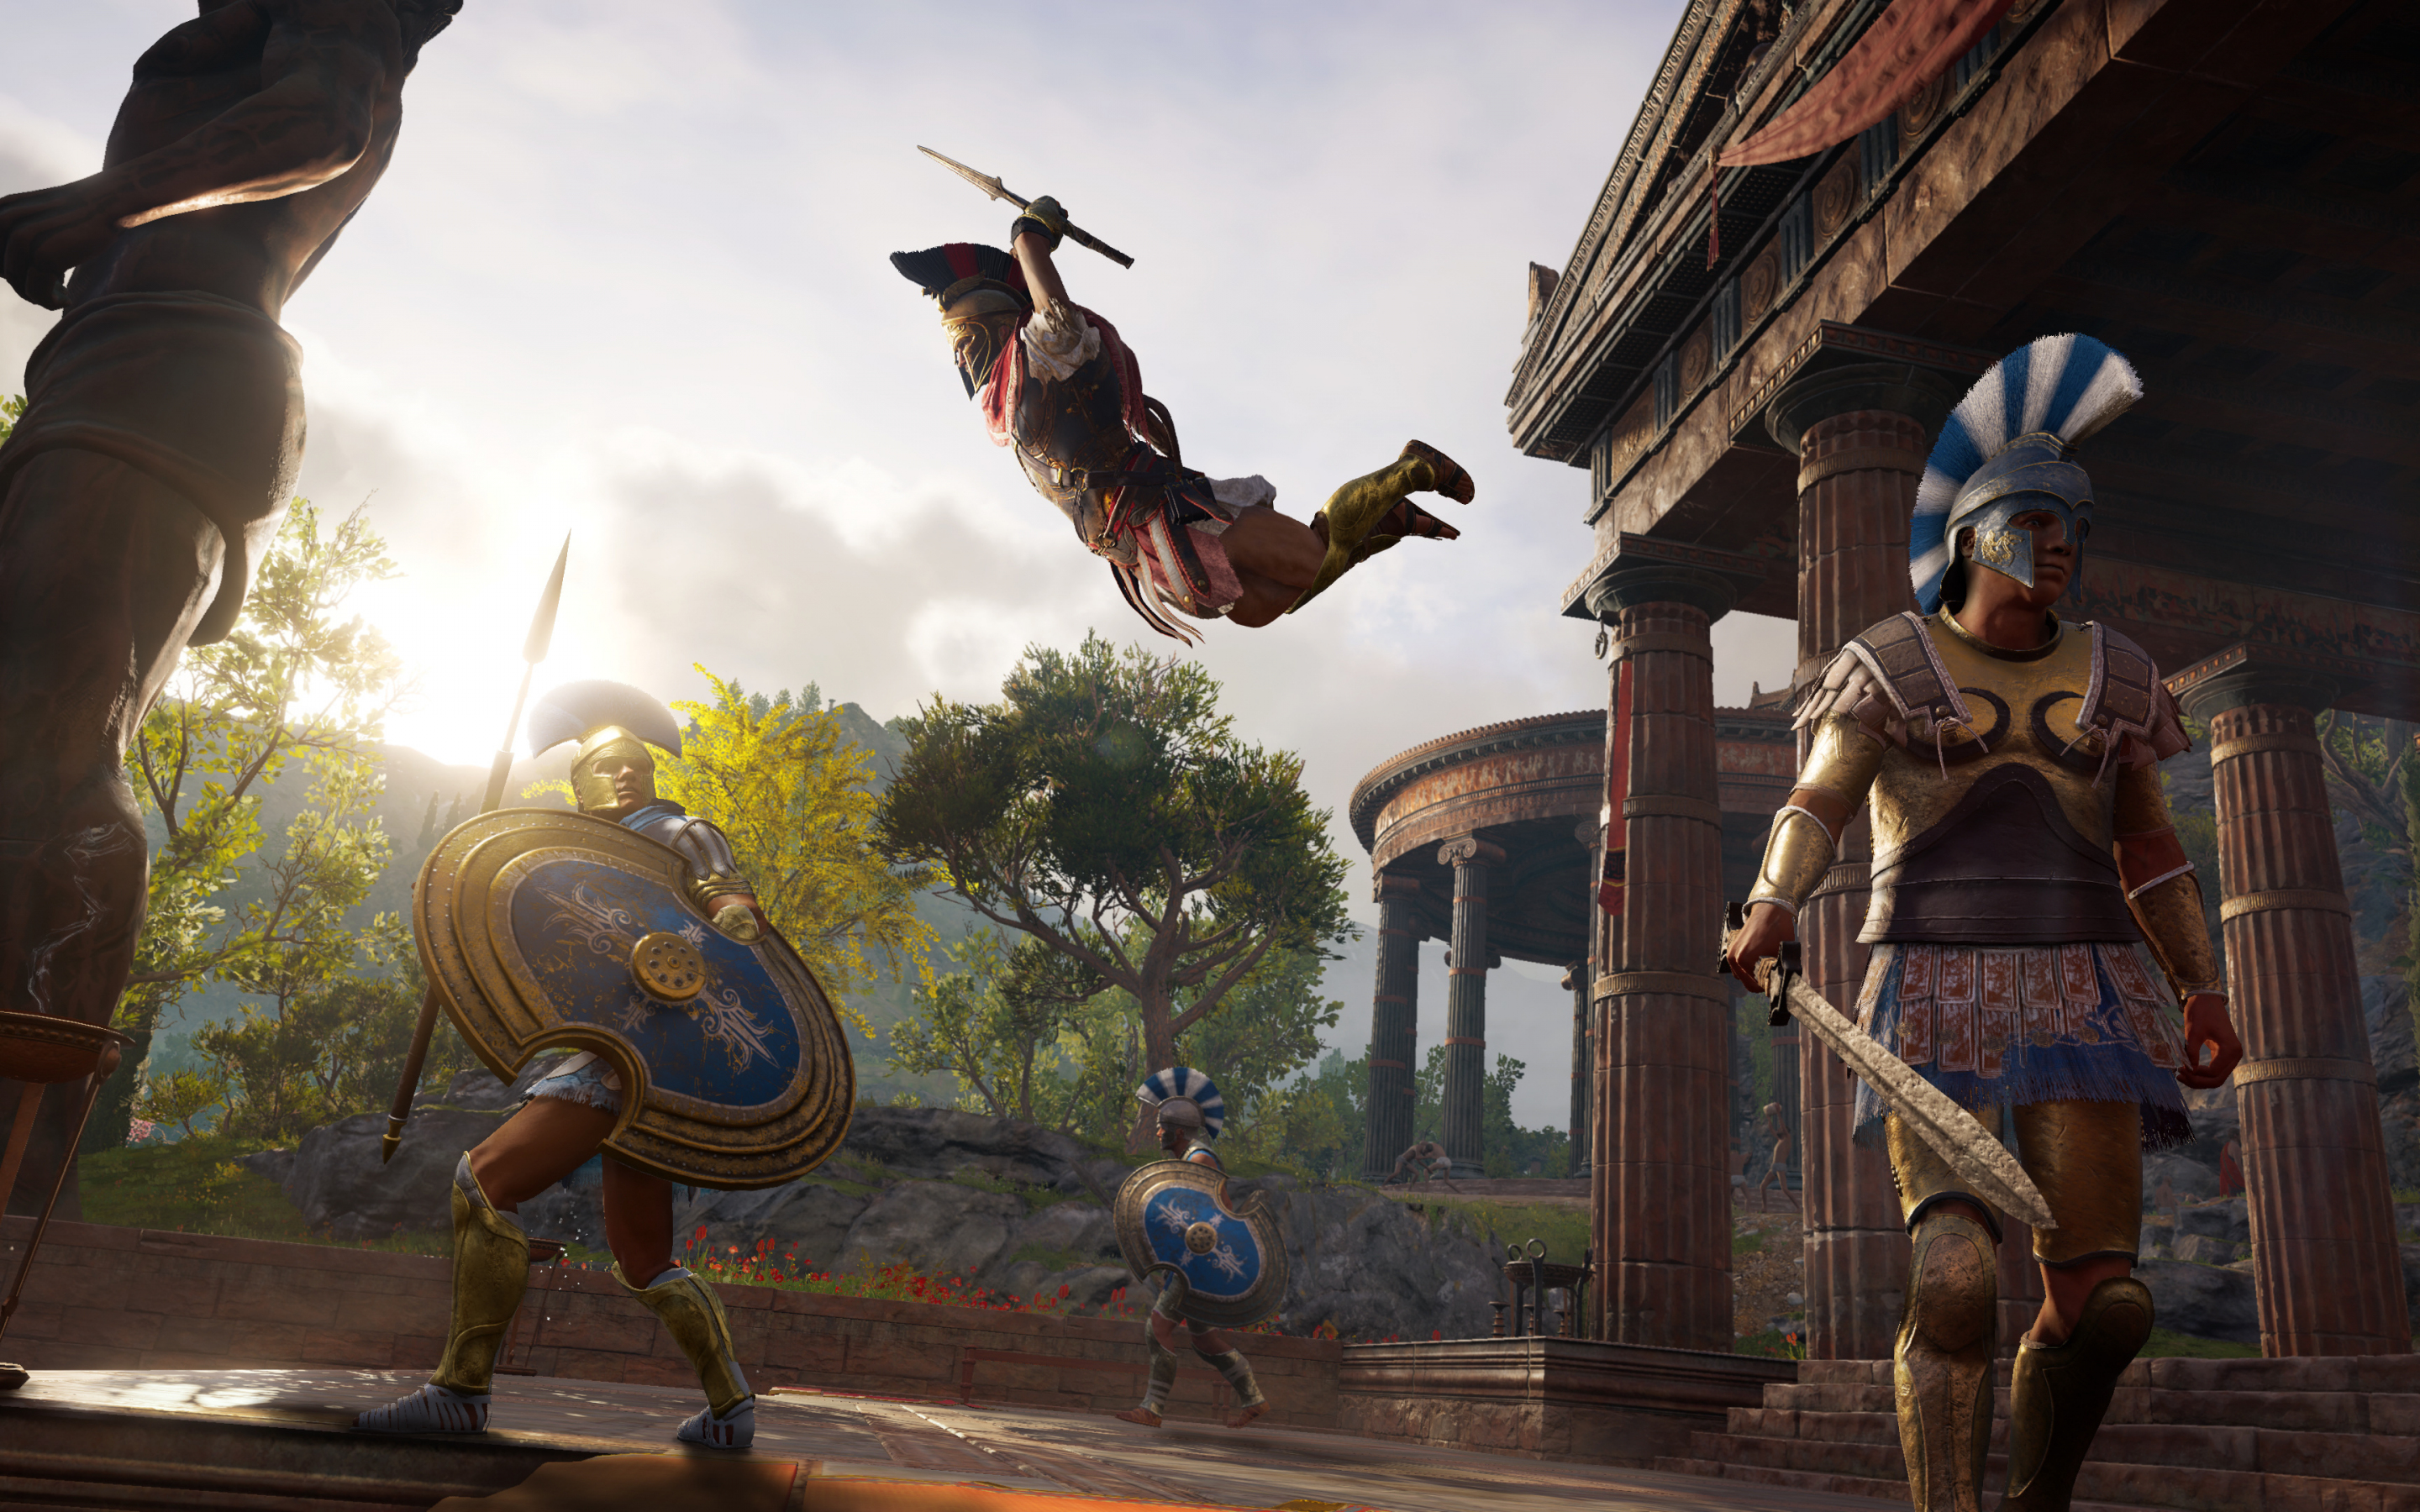 Warrior, fight arena, Assassin's Creed Odyssey, 2018, 2880x1800 wallpaper